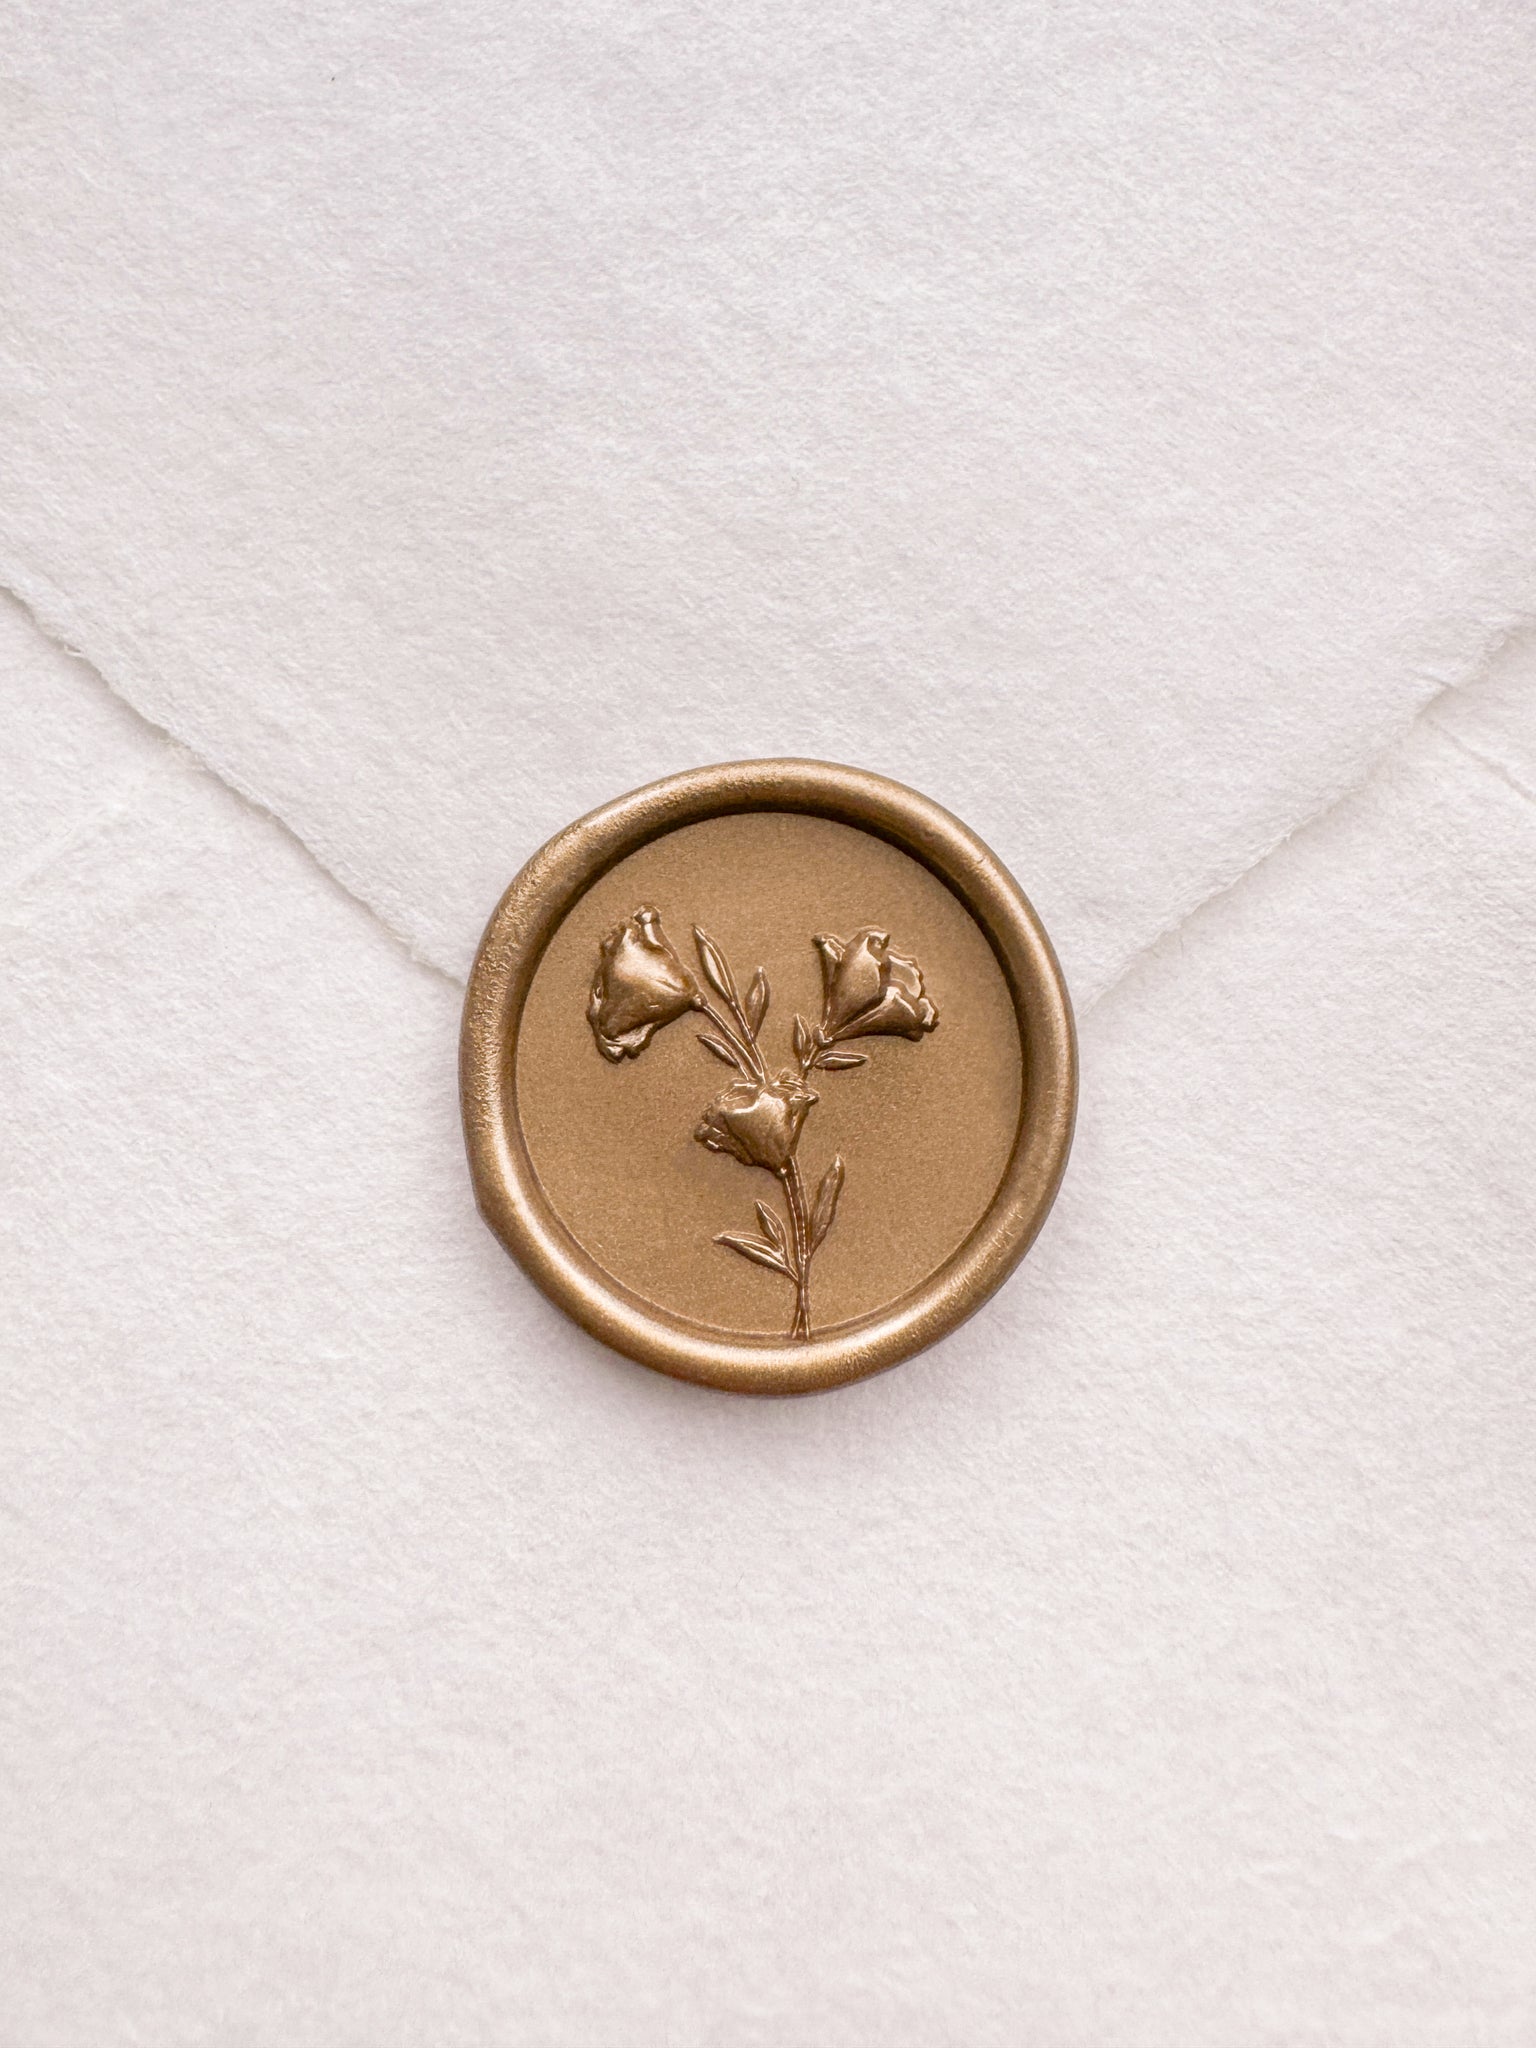 Floral design gold wax seal with 3D engraving details on a white handmade paper envelope